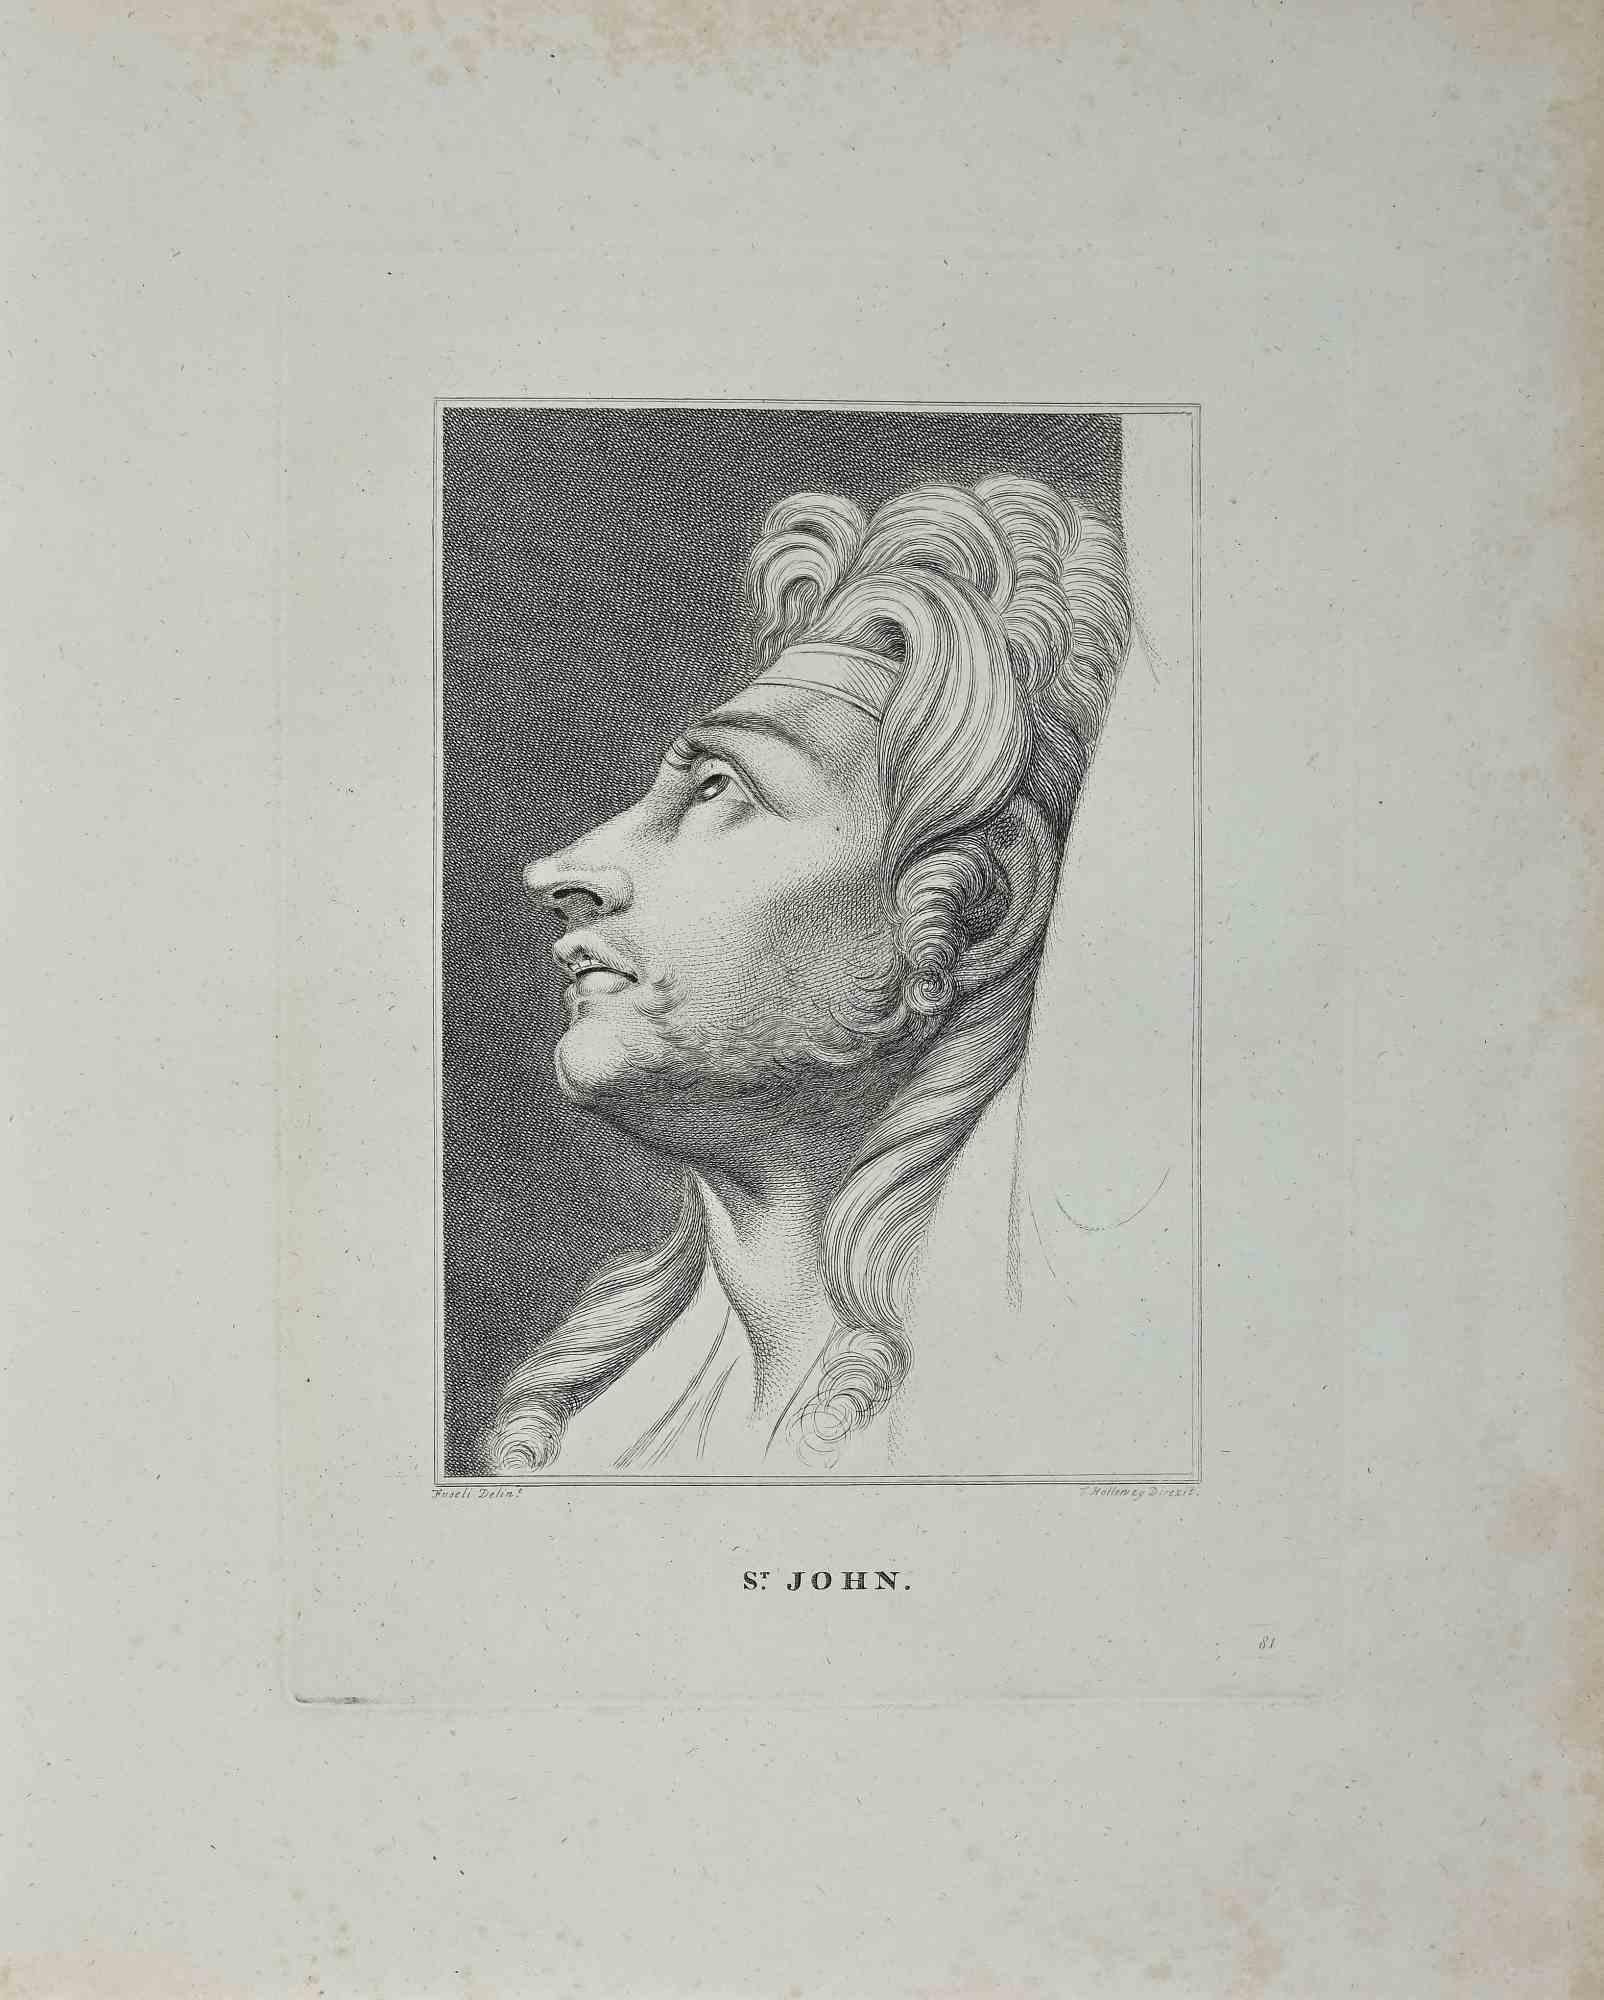 Portrait of S. John is an original artwork realized by Heinrich Fuseli (1741 - 1825).

Original Etching from J.C. Lavater's "Essays on Physiognomy, Designed to promote the Knowledge and the Love of Mankind", London, Bensley, 1810. 

A the bottom